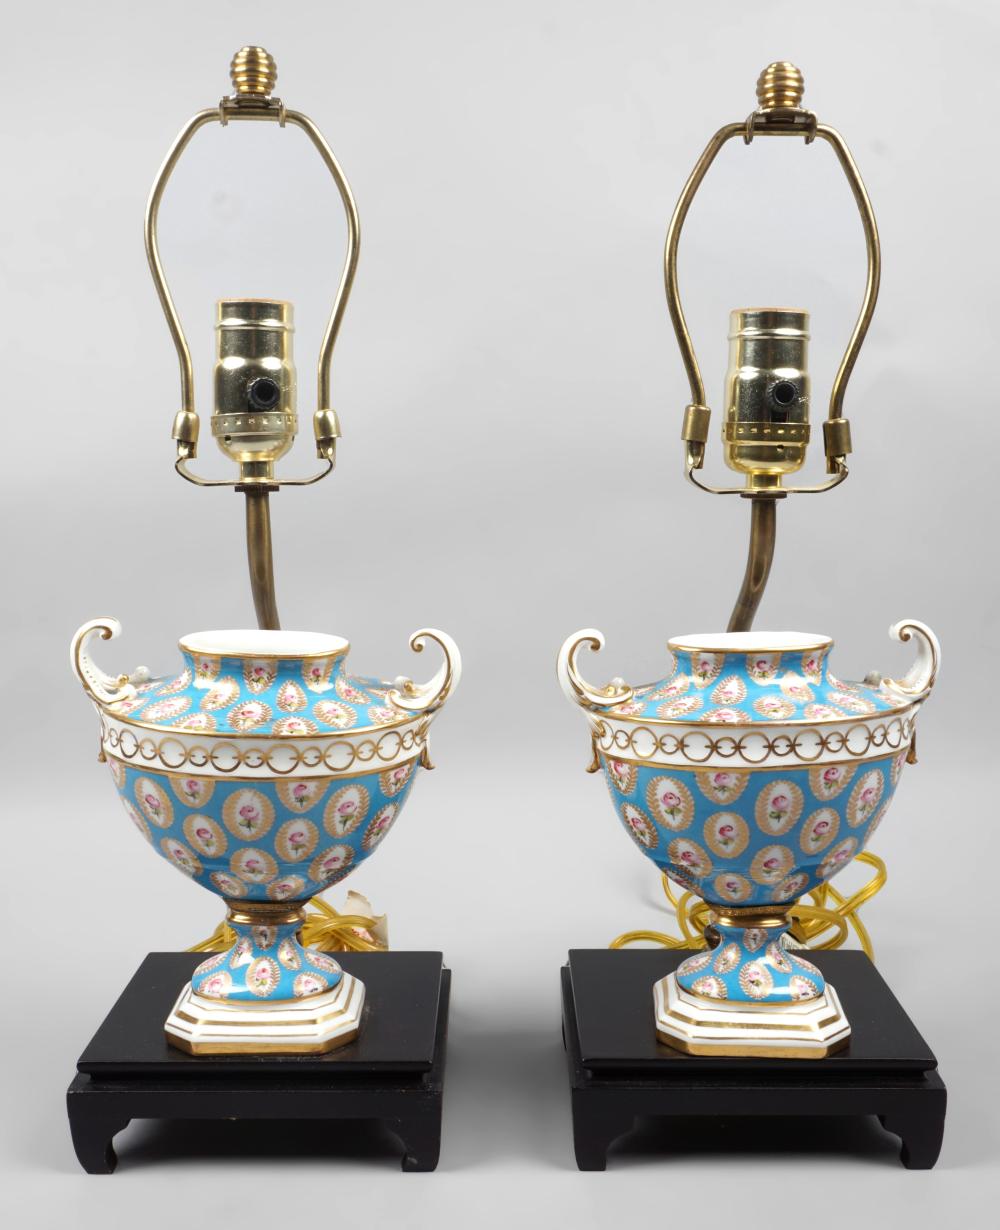 PAIR OF FRENCH STYLE PORCELAIN